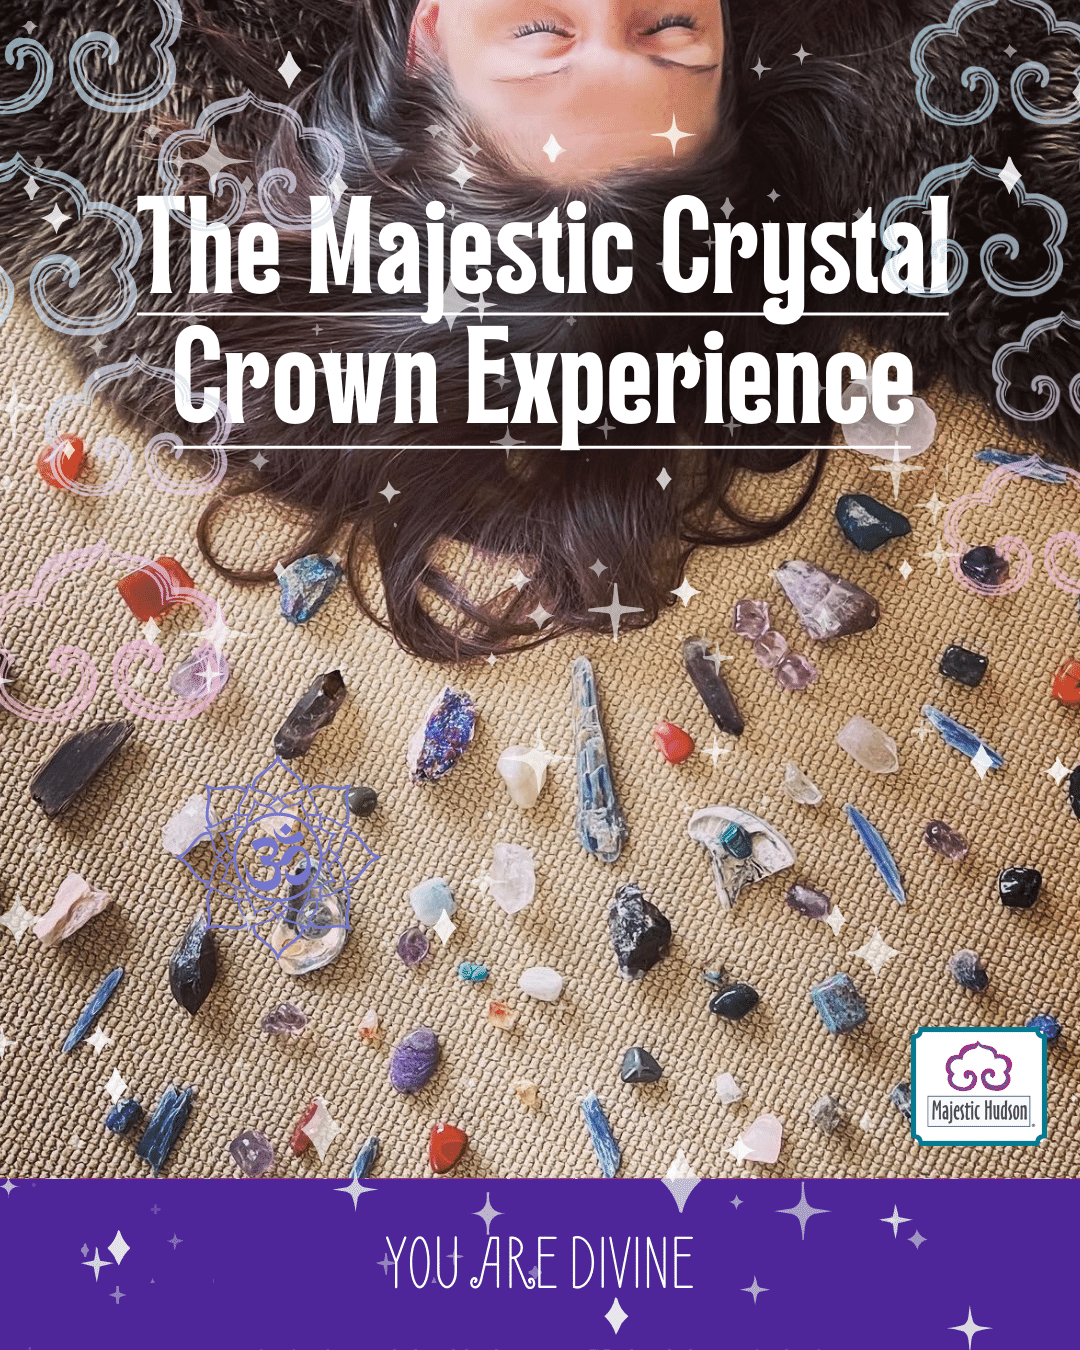 The Majestic Crystal Crown Experience